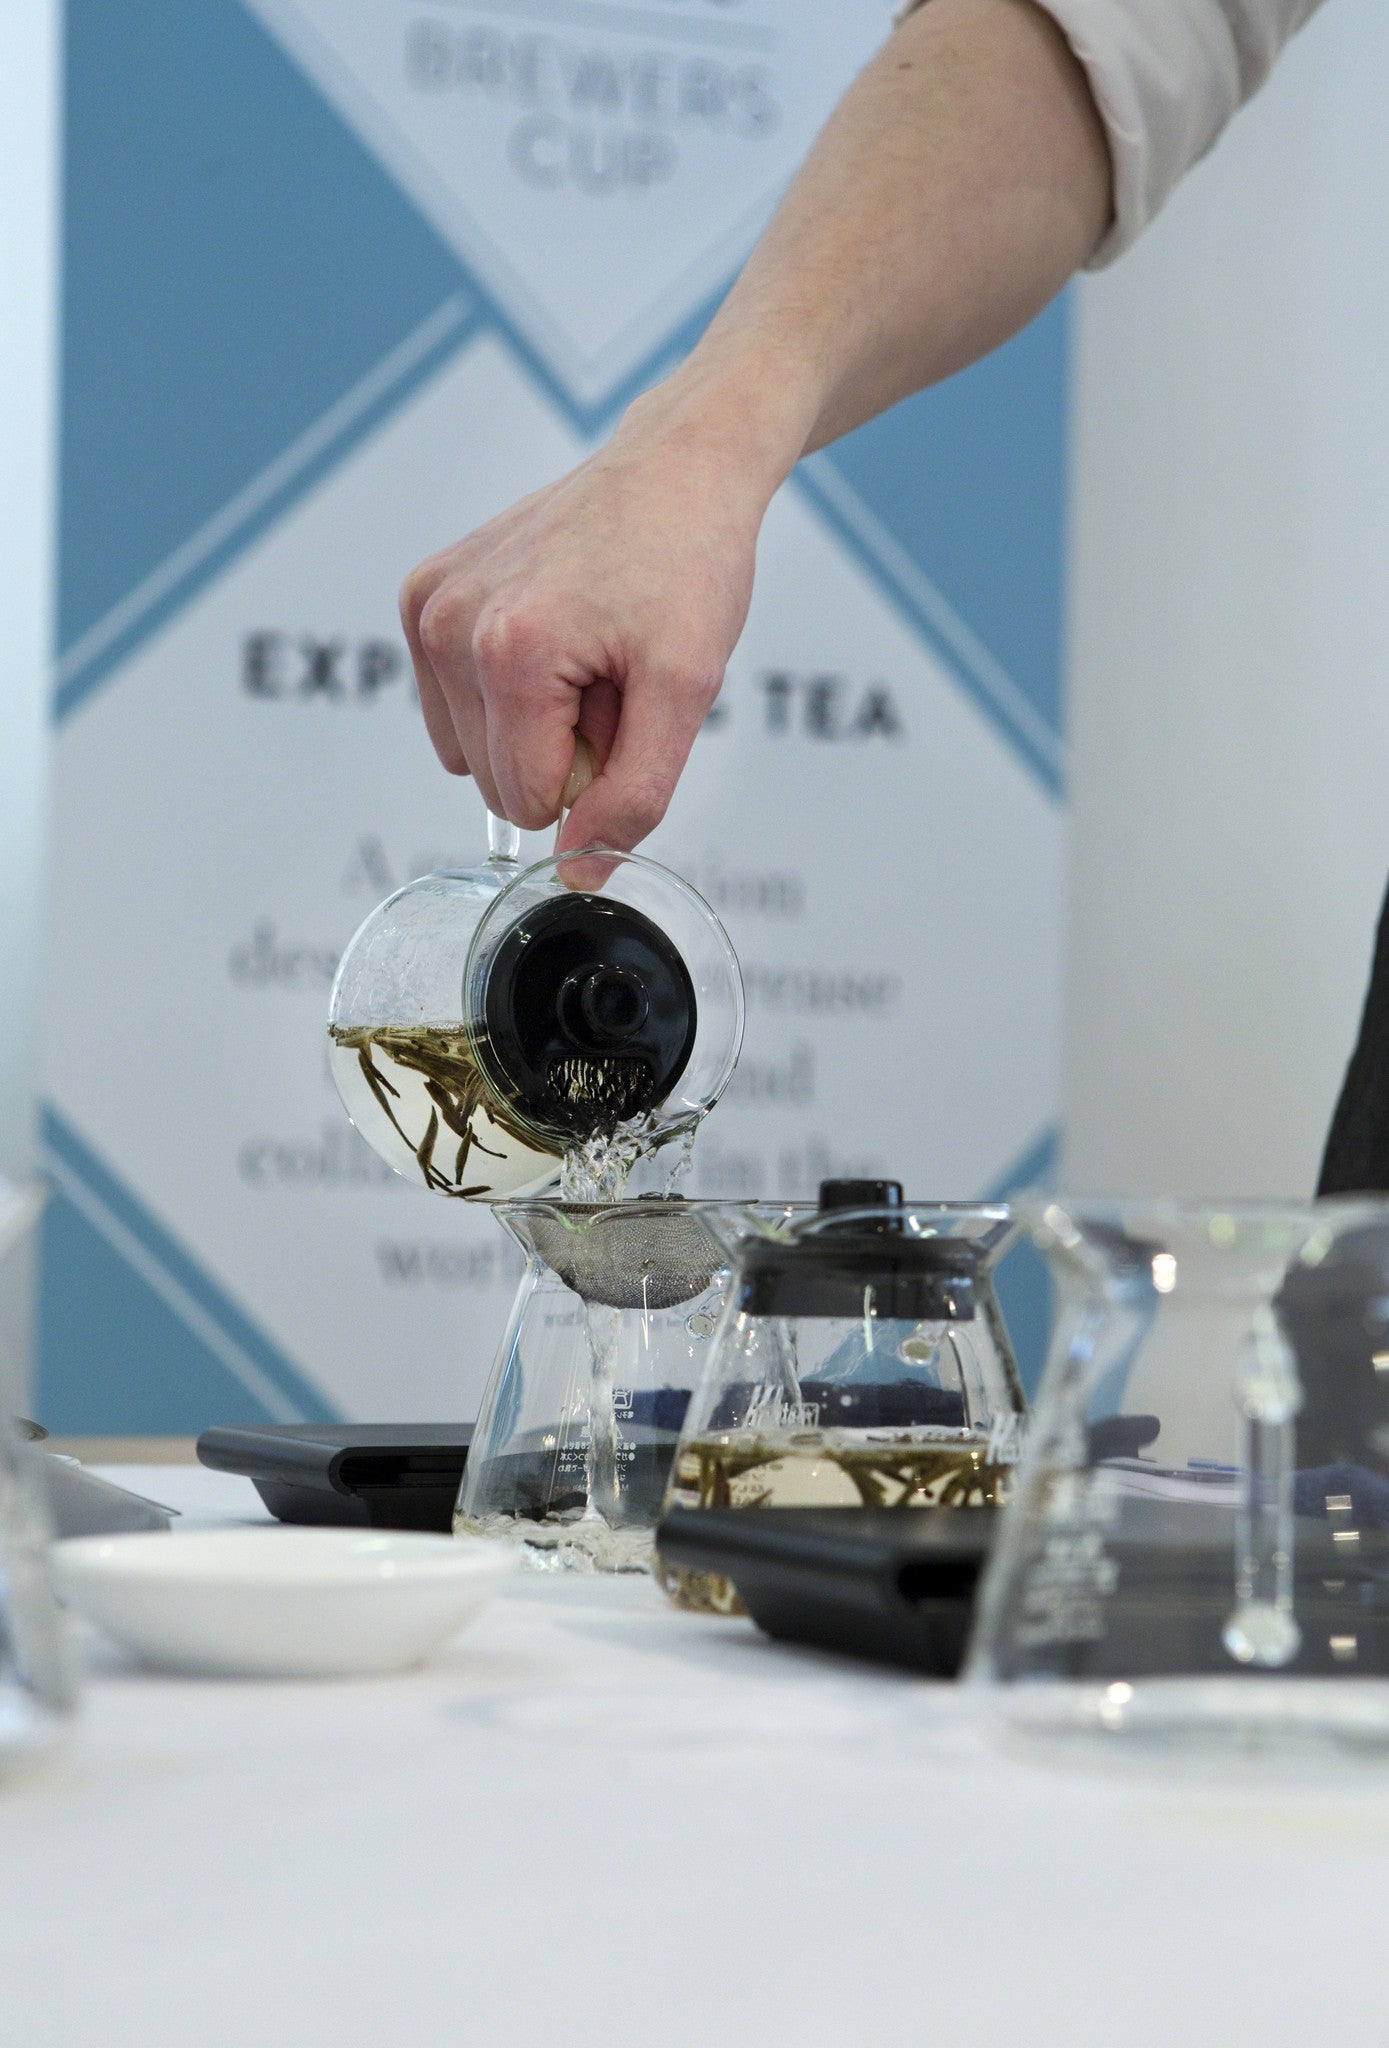 Video of The Tea and Coffee Brewers Cups, 2015